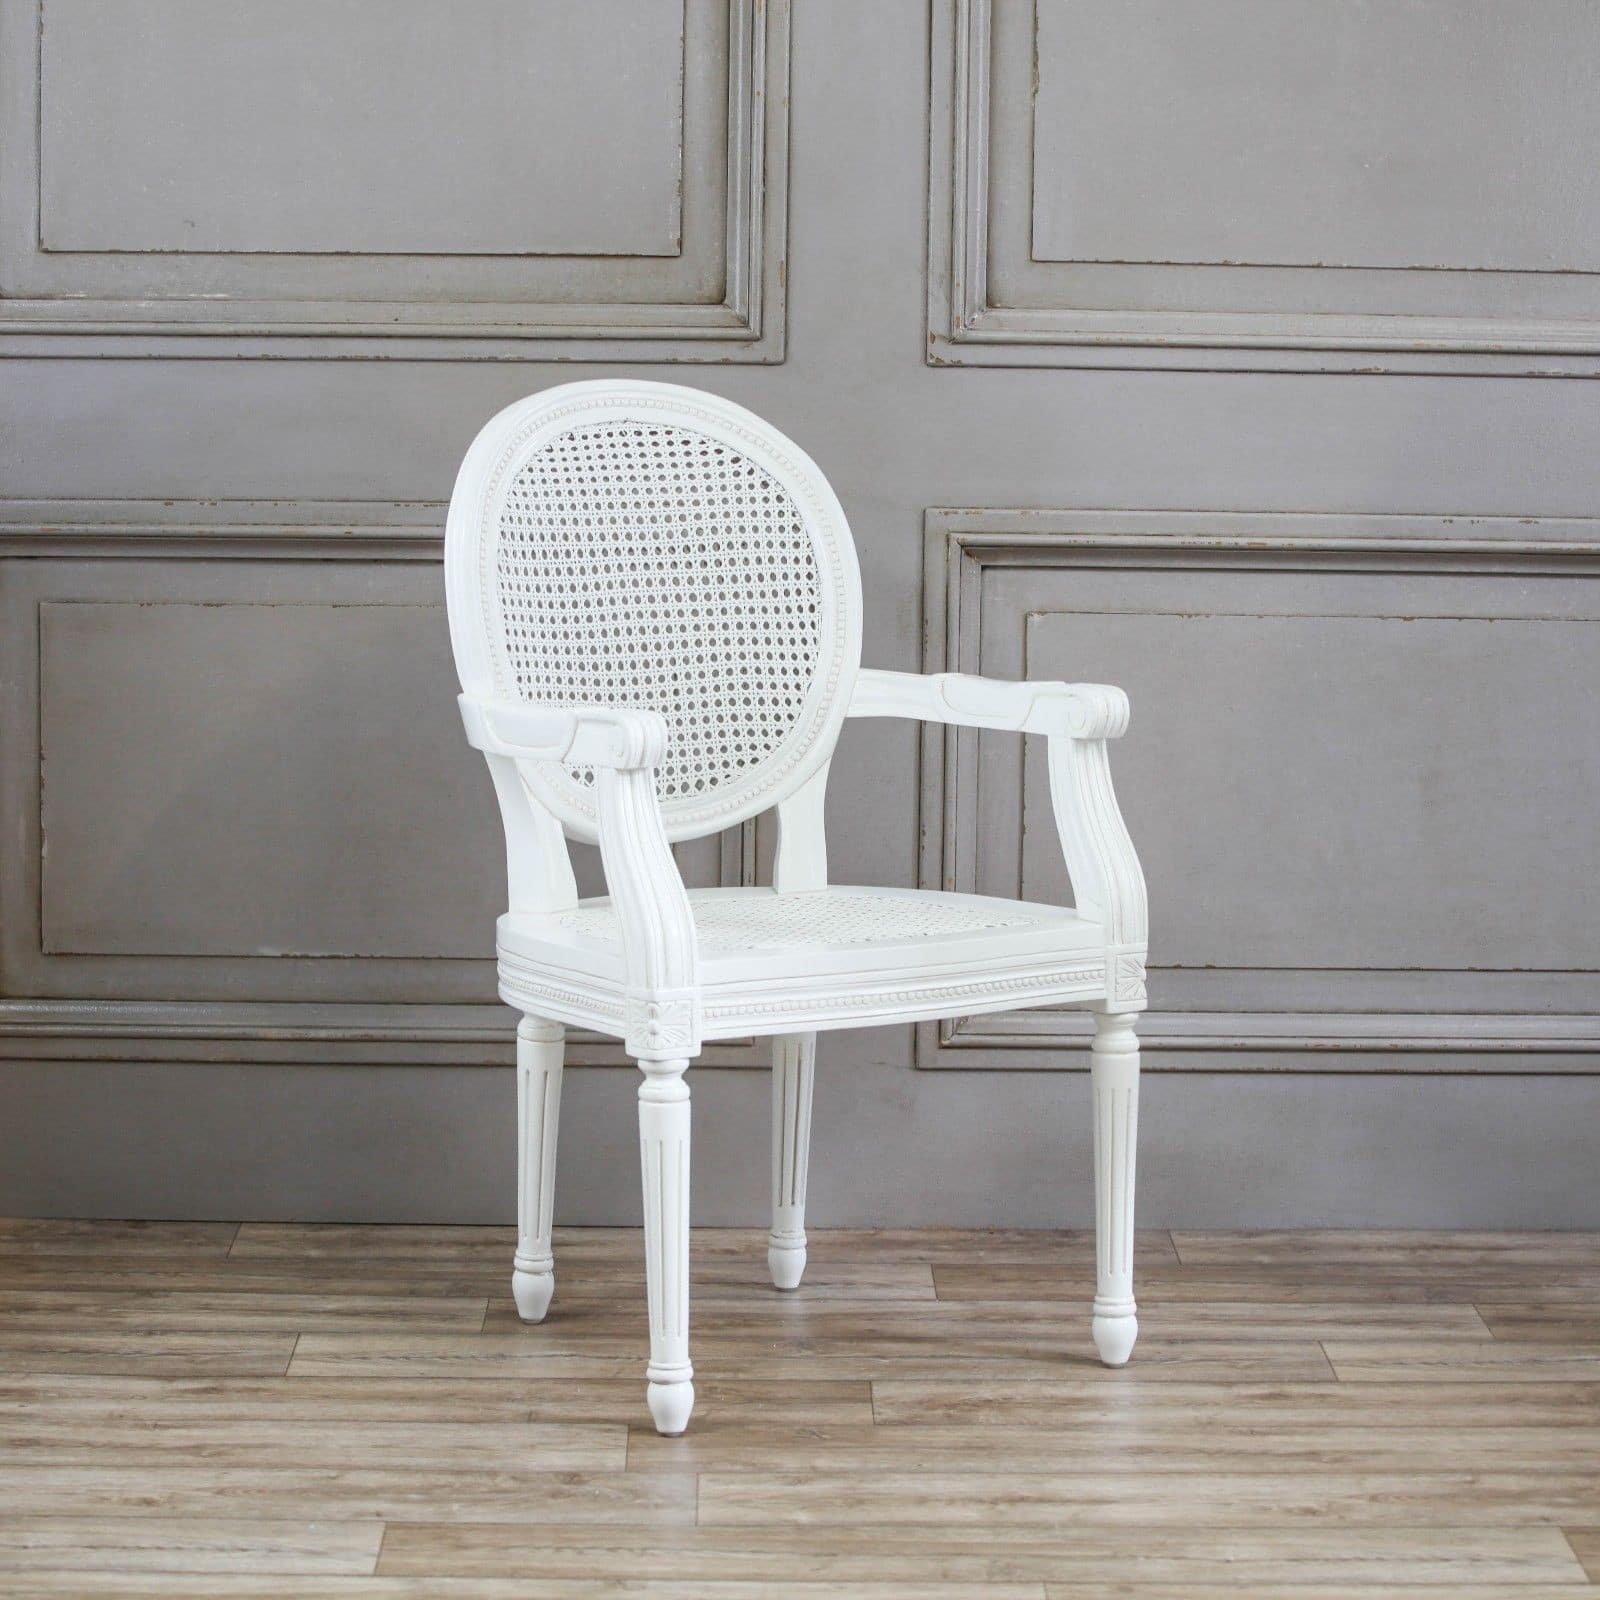 French Chateau White Rattan Dining / Bedroom Arm Chair Furniture - La